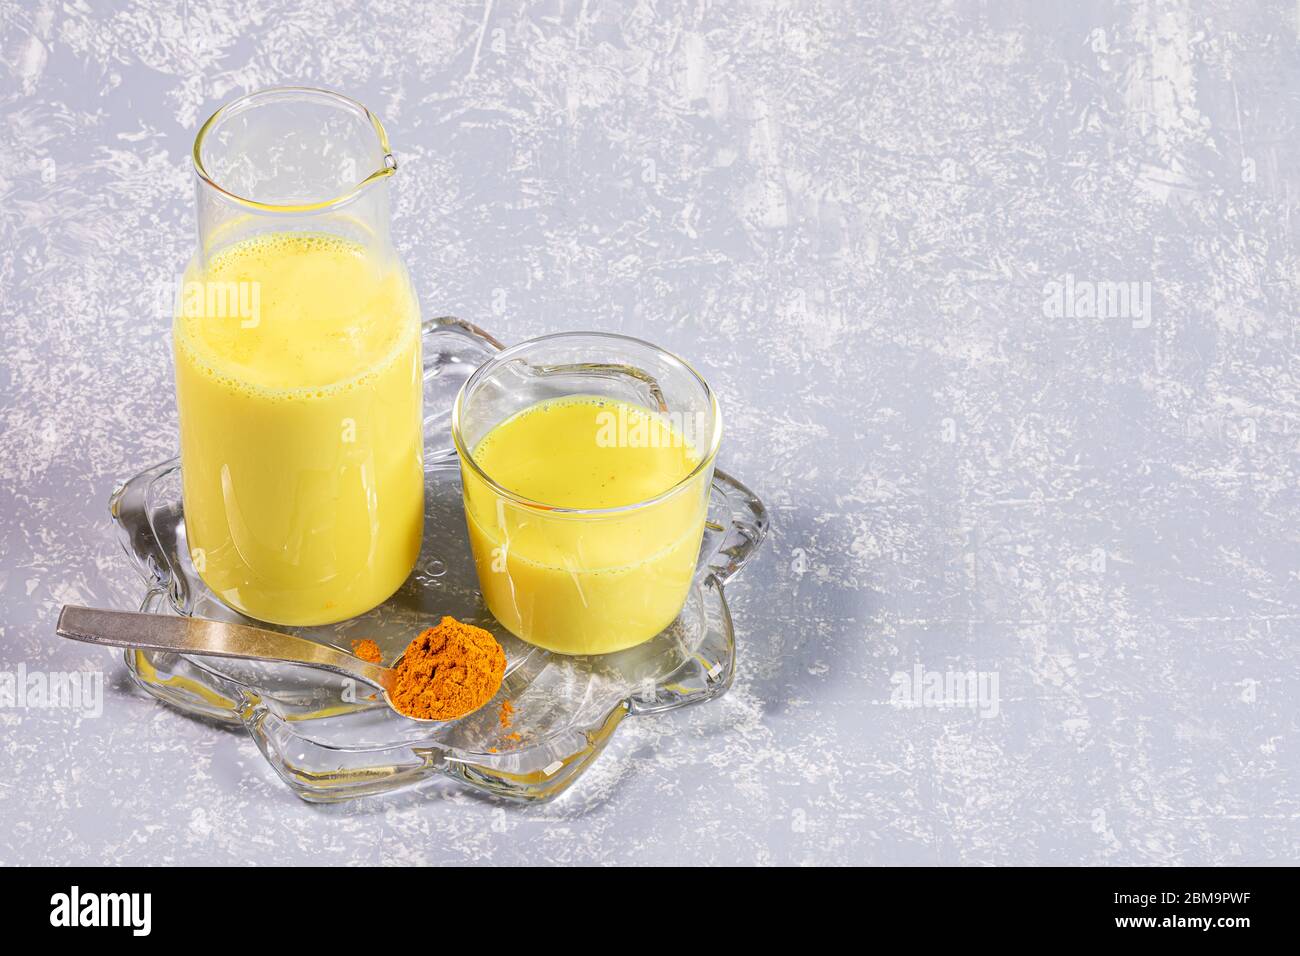 Organic turmeric milk. Bottle and glass with golden milk on figured transparent plate on light grey background. Concept of healthy eating, diet and de Stock Photo